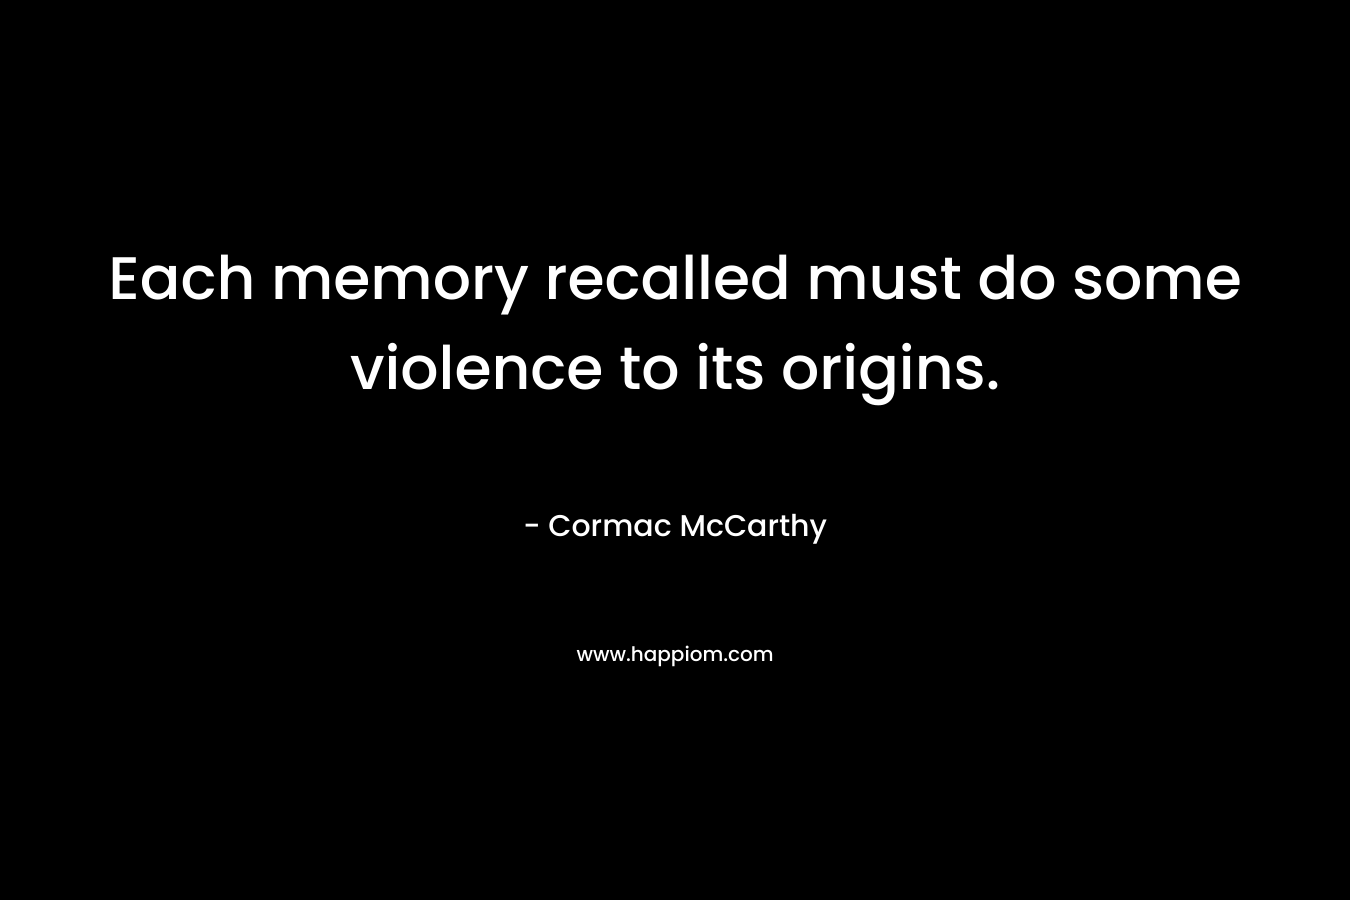 Each memory recalled must do some violence to its origins. – Cormac McCarthy